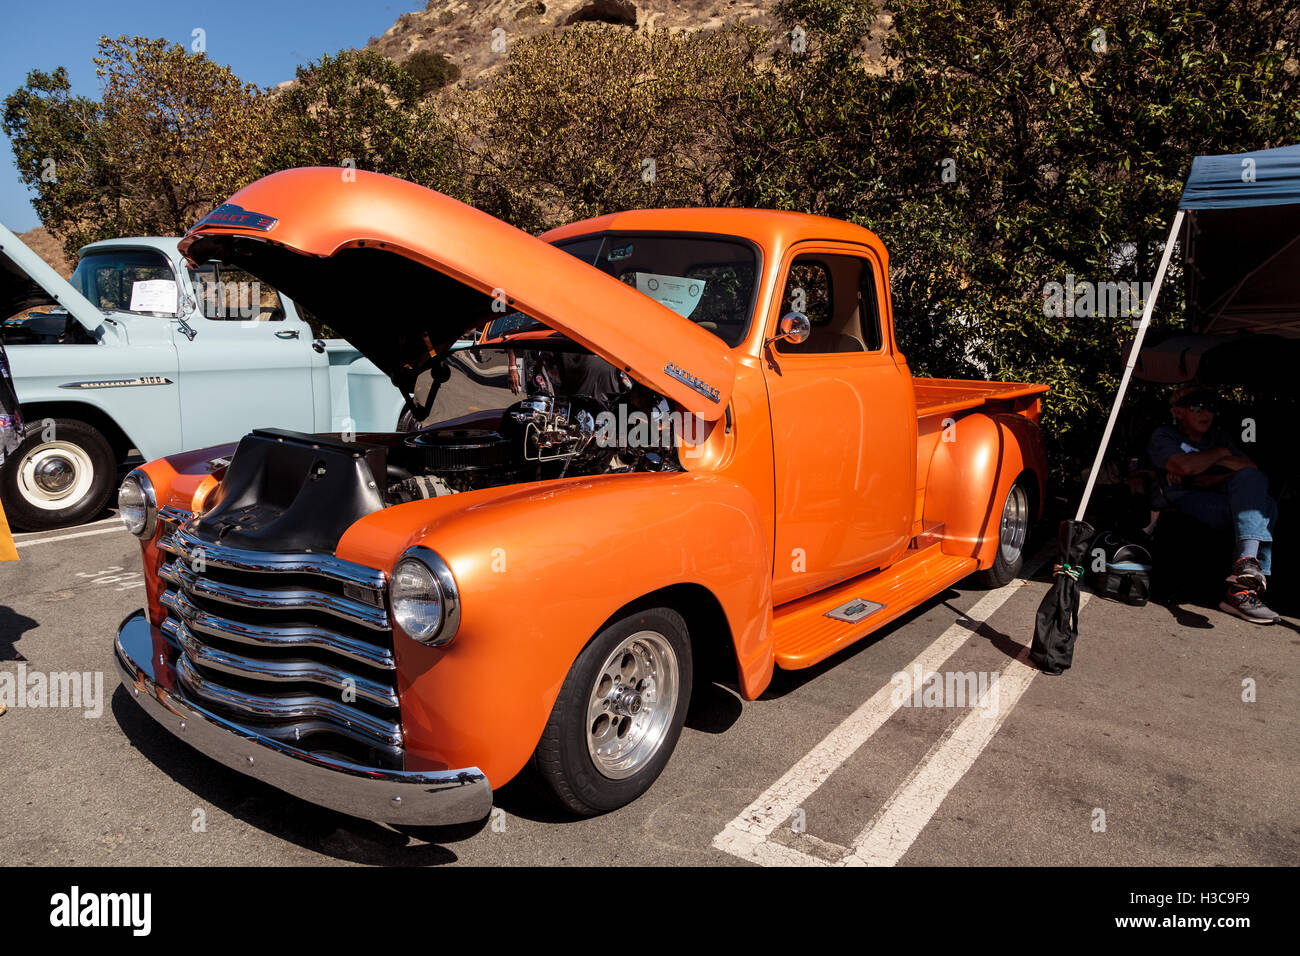 Laguna Beach, CA, USA - October 2, 2016: Orange 1948 Chevy Truck owned by Tim Timmerman and displayed at the Rotary Club of Lagu Stock Photo